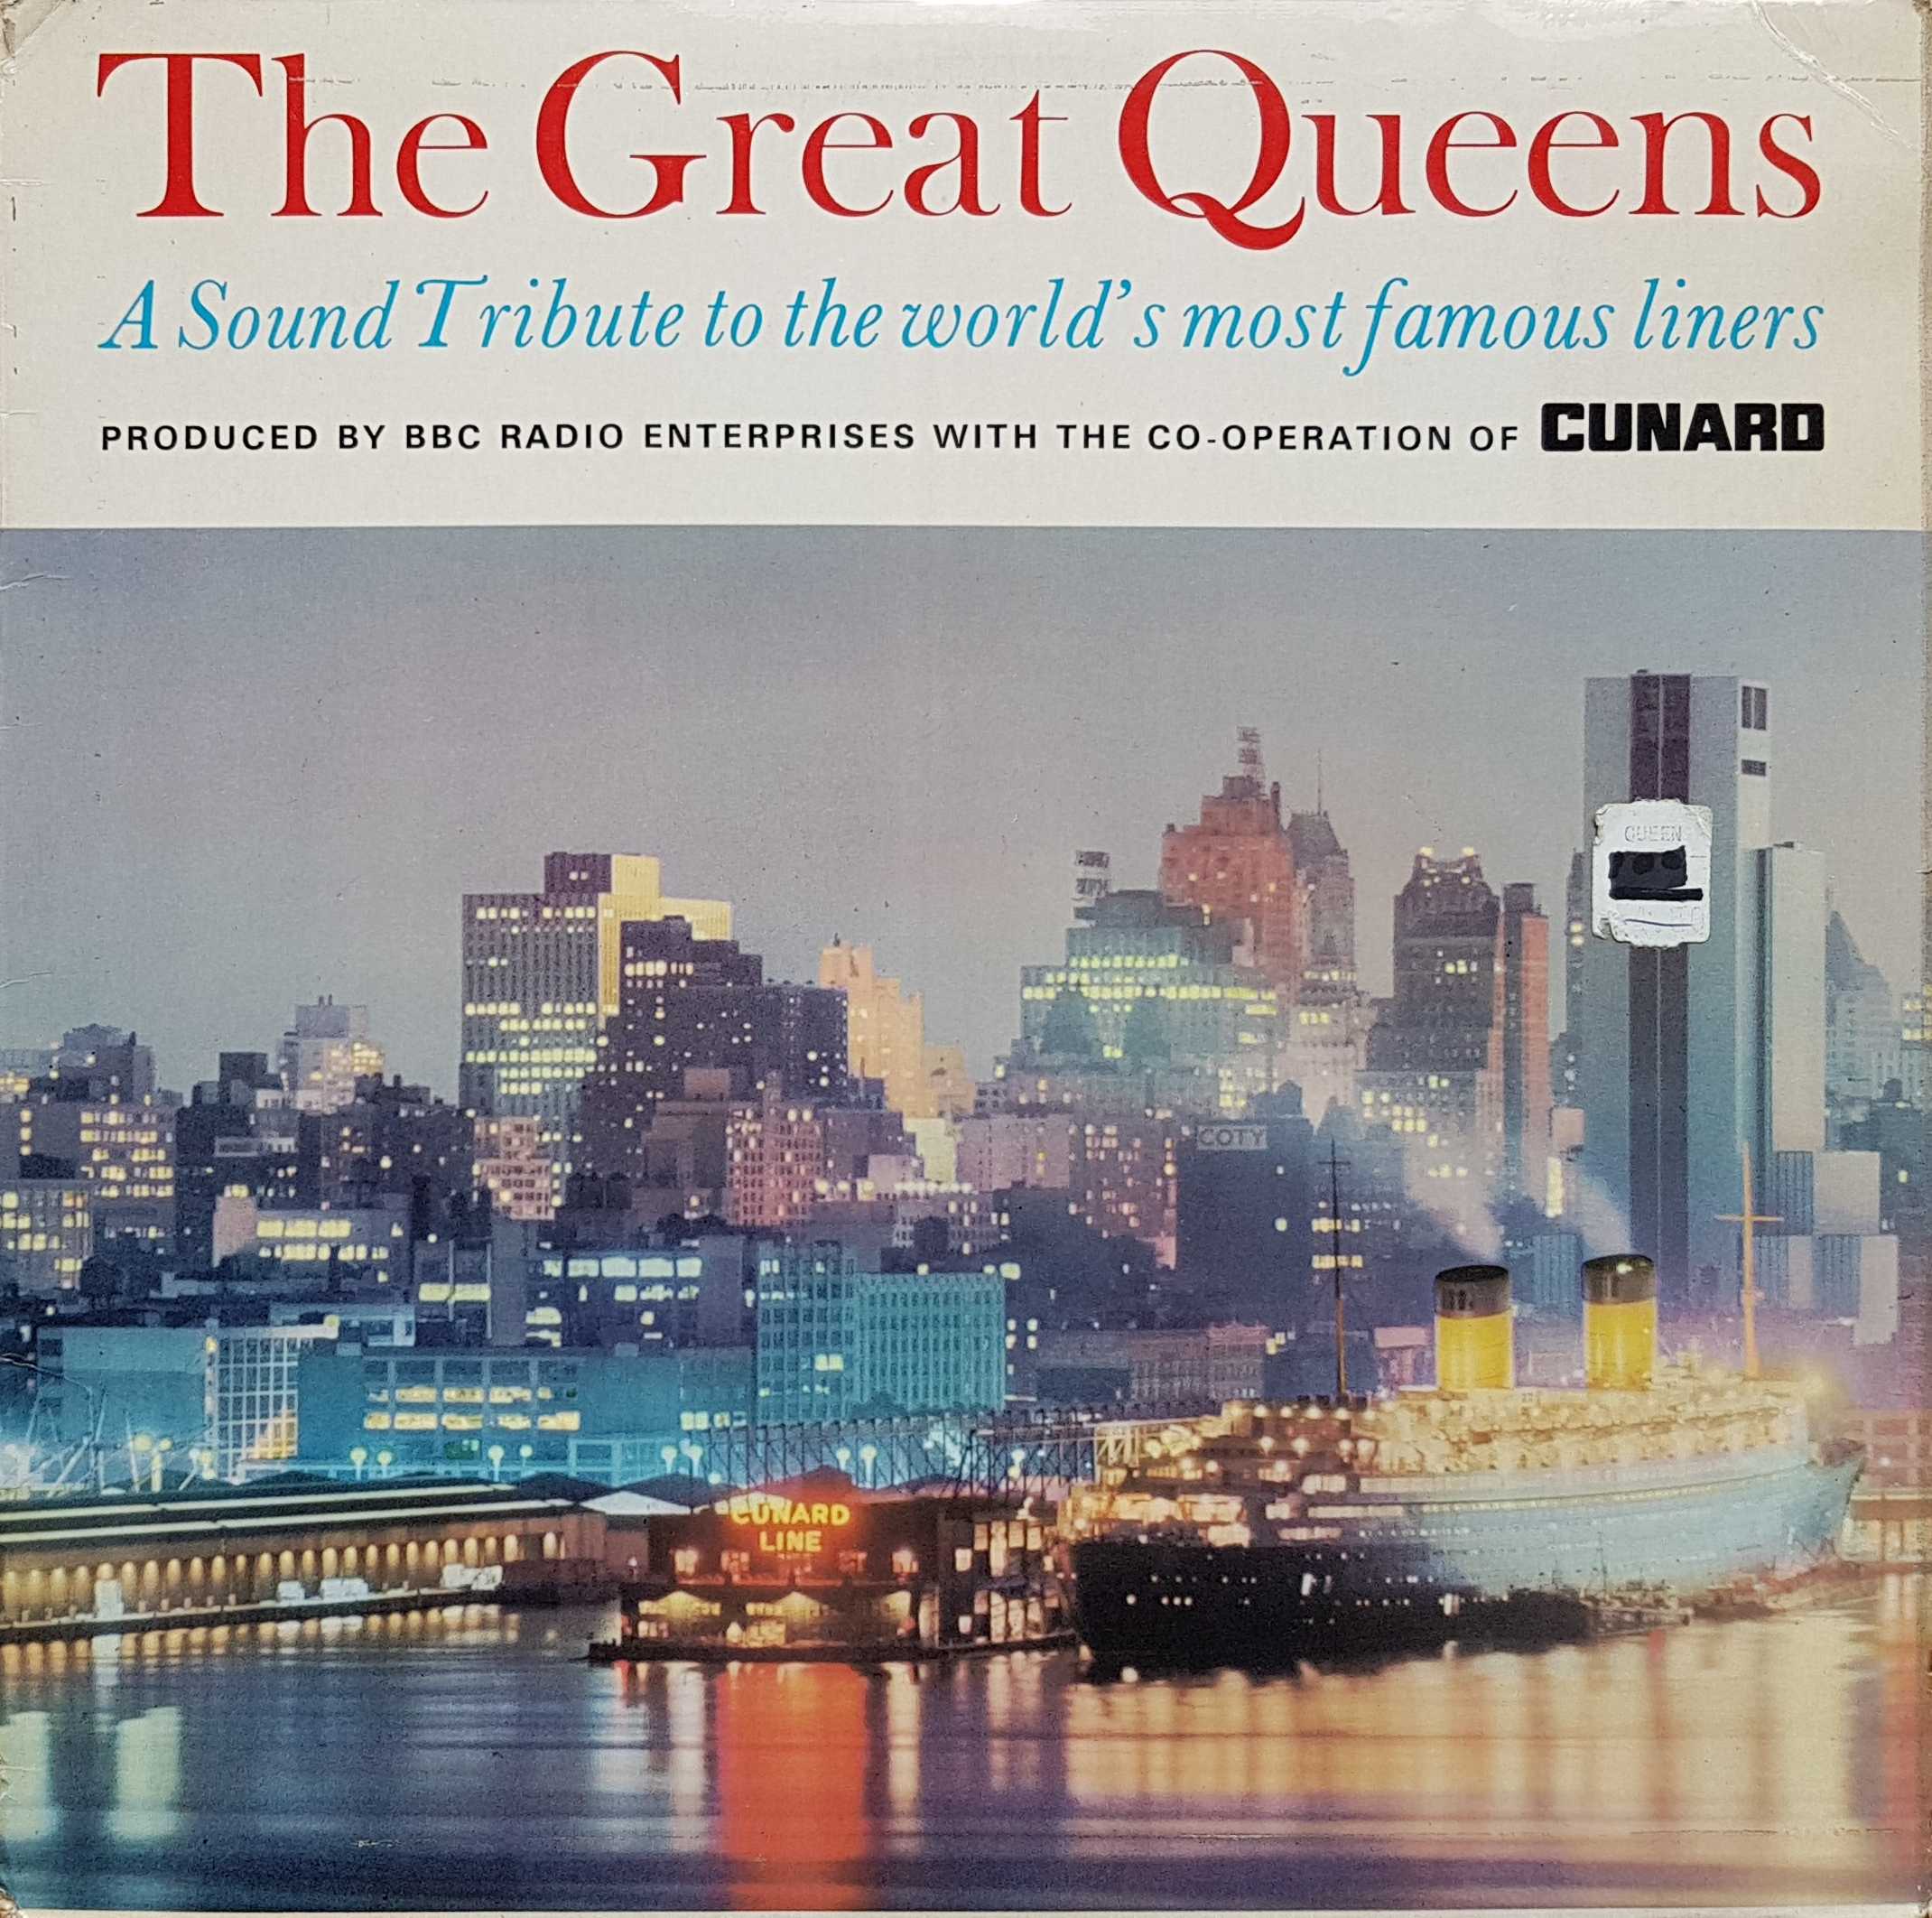 Picture of RE 9 The great Queens - A sound tribute to the World's most famous liners by artist Robert Stannage from the BBC albums - Records and Tapes library